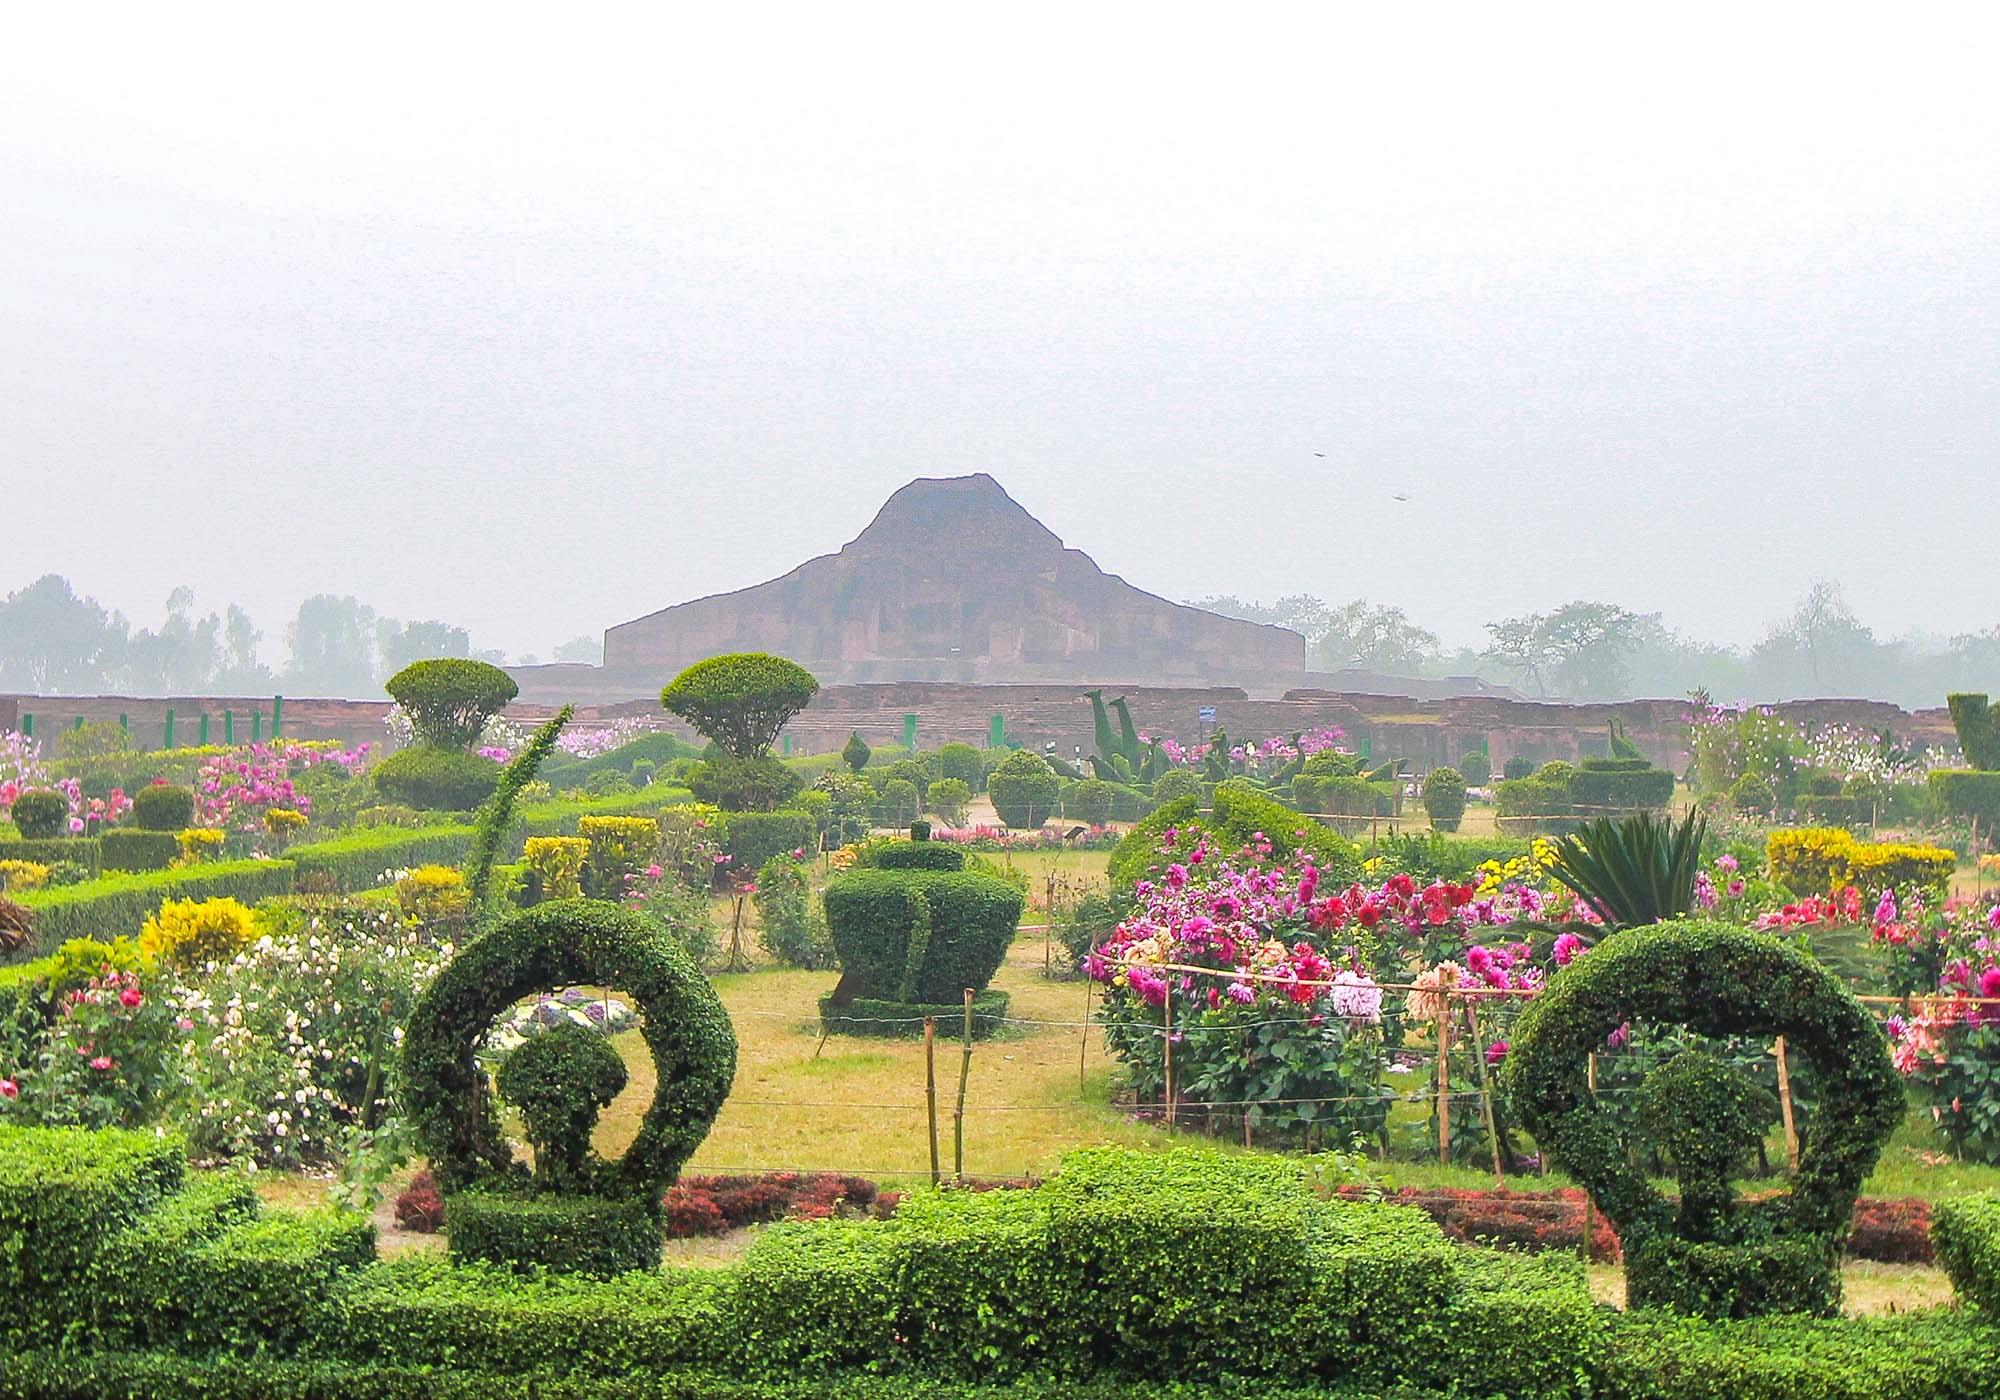 Vibrant gardens around the Paharpur site continue the Buddhist tradition of respecting the natural environment. – © Julfiker Ahmed